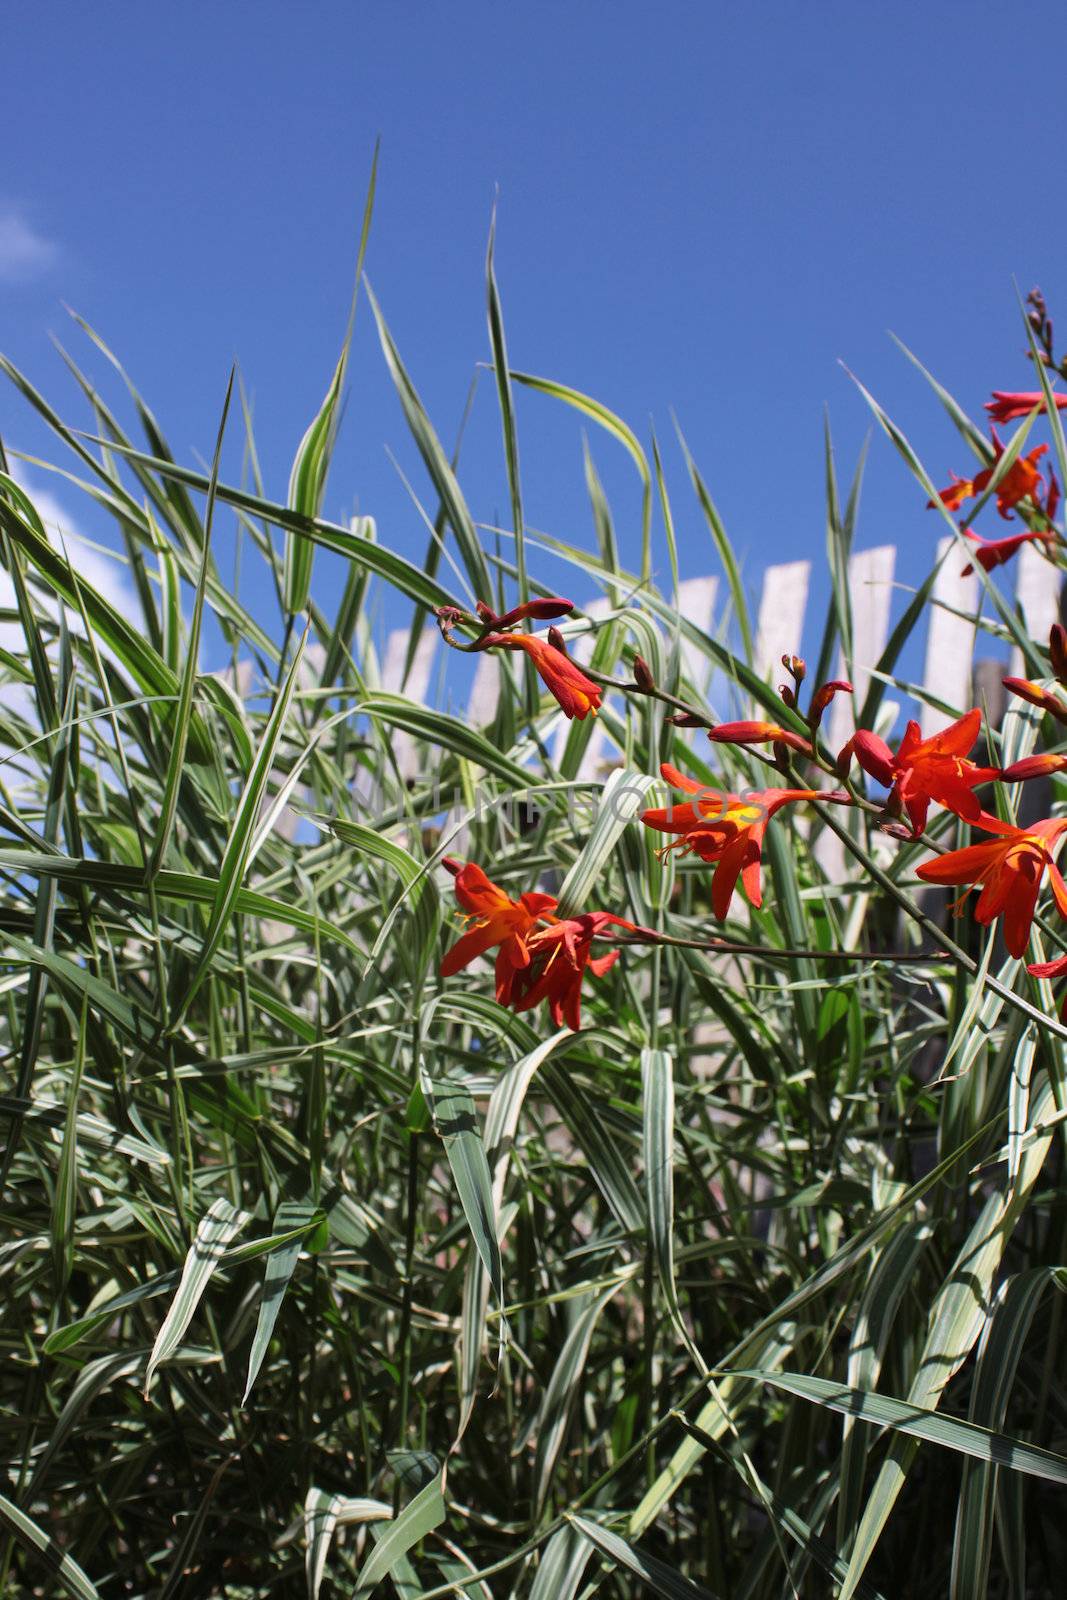 Ornamental grasses and Crocosmia, a small orange flowering plant in the iris family, Iridaceae, a deciduous perennial plant. Set on a portrait format against a blue sky background.